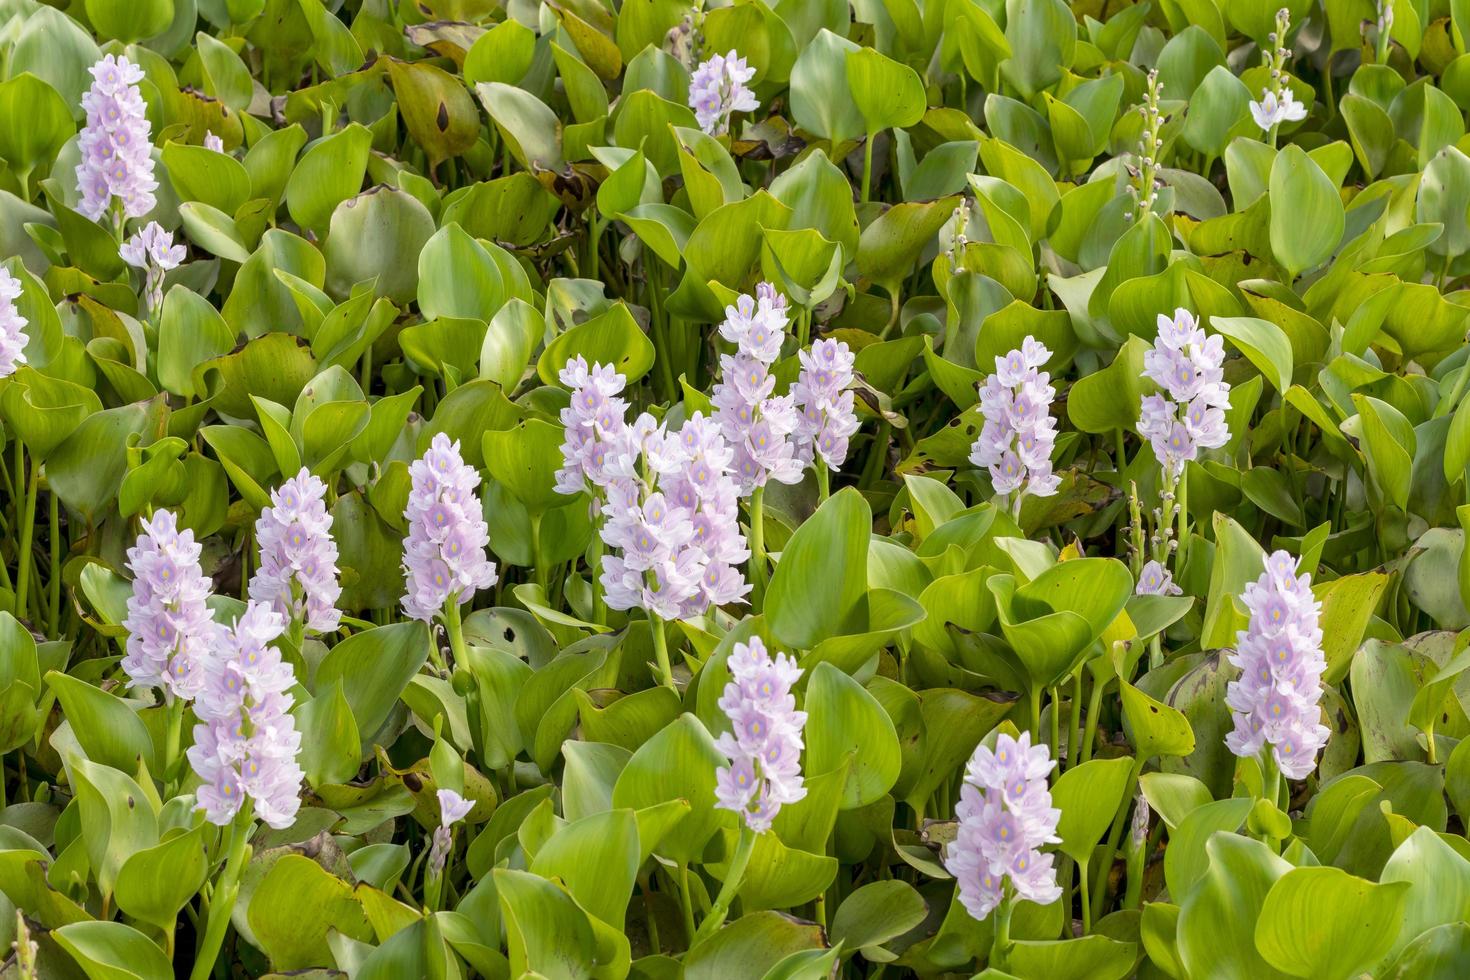 Many purple hyacinth flowers in the countryside. photo